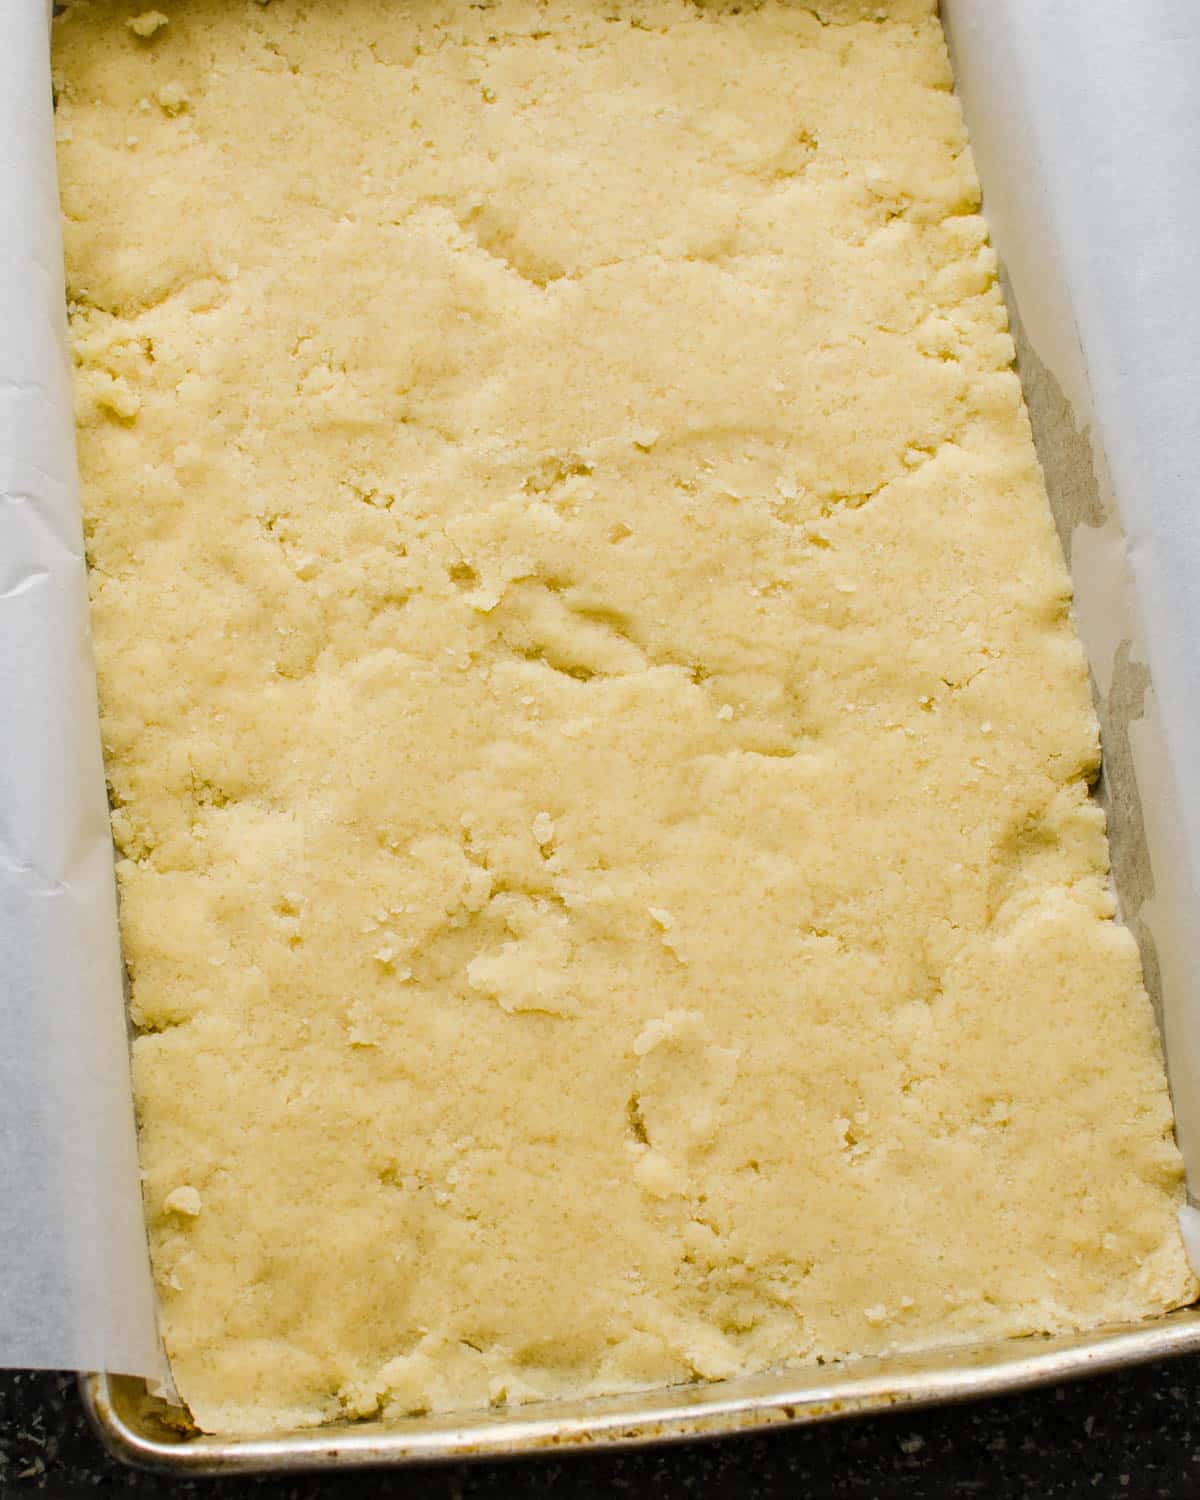 Pressing the shortbread crust into the prepared baking pan.